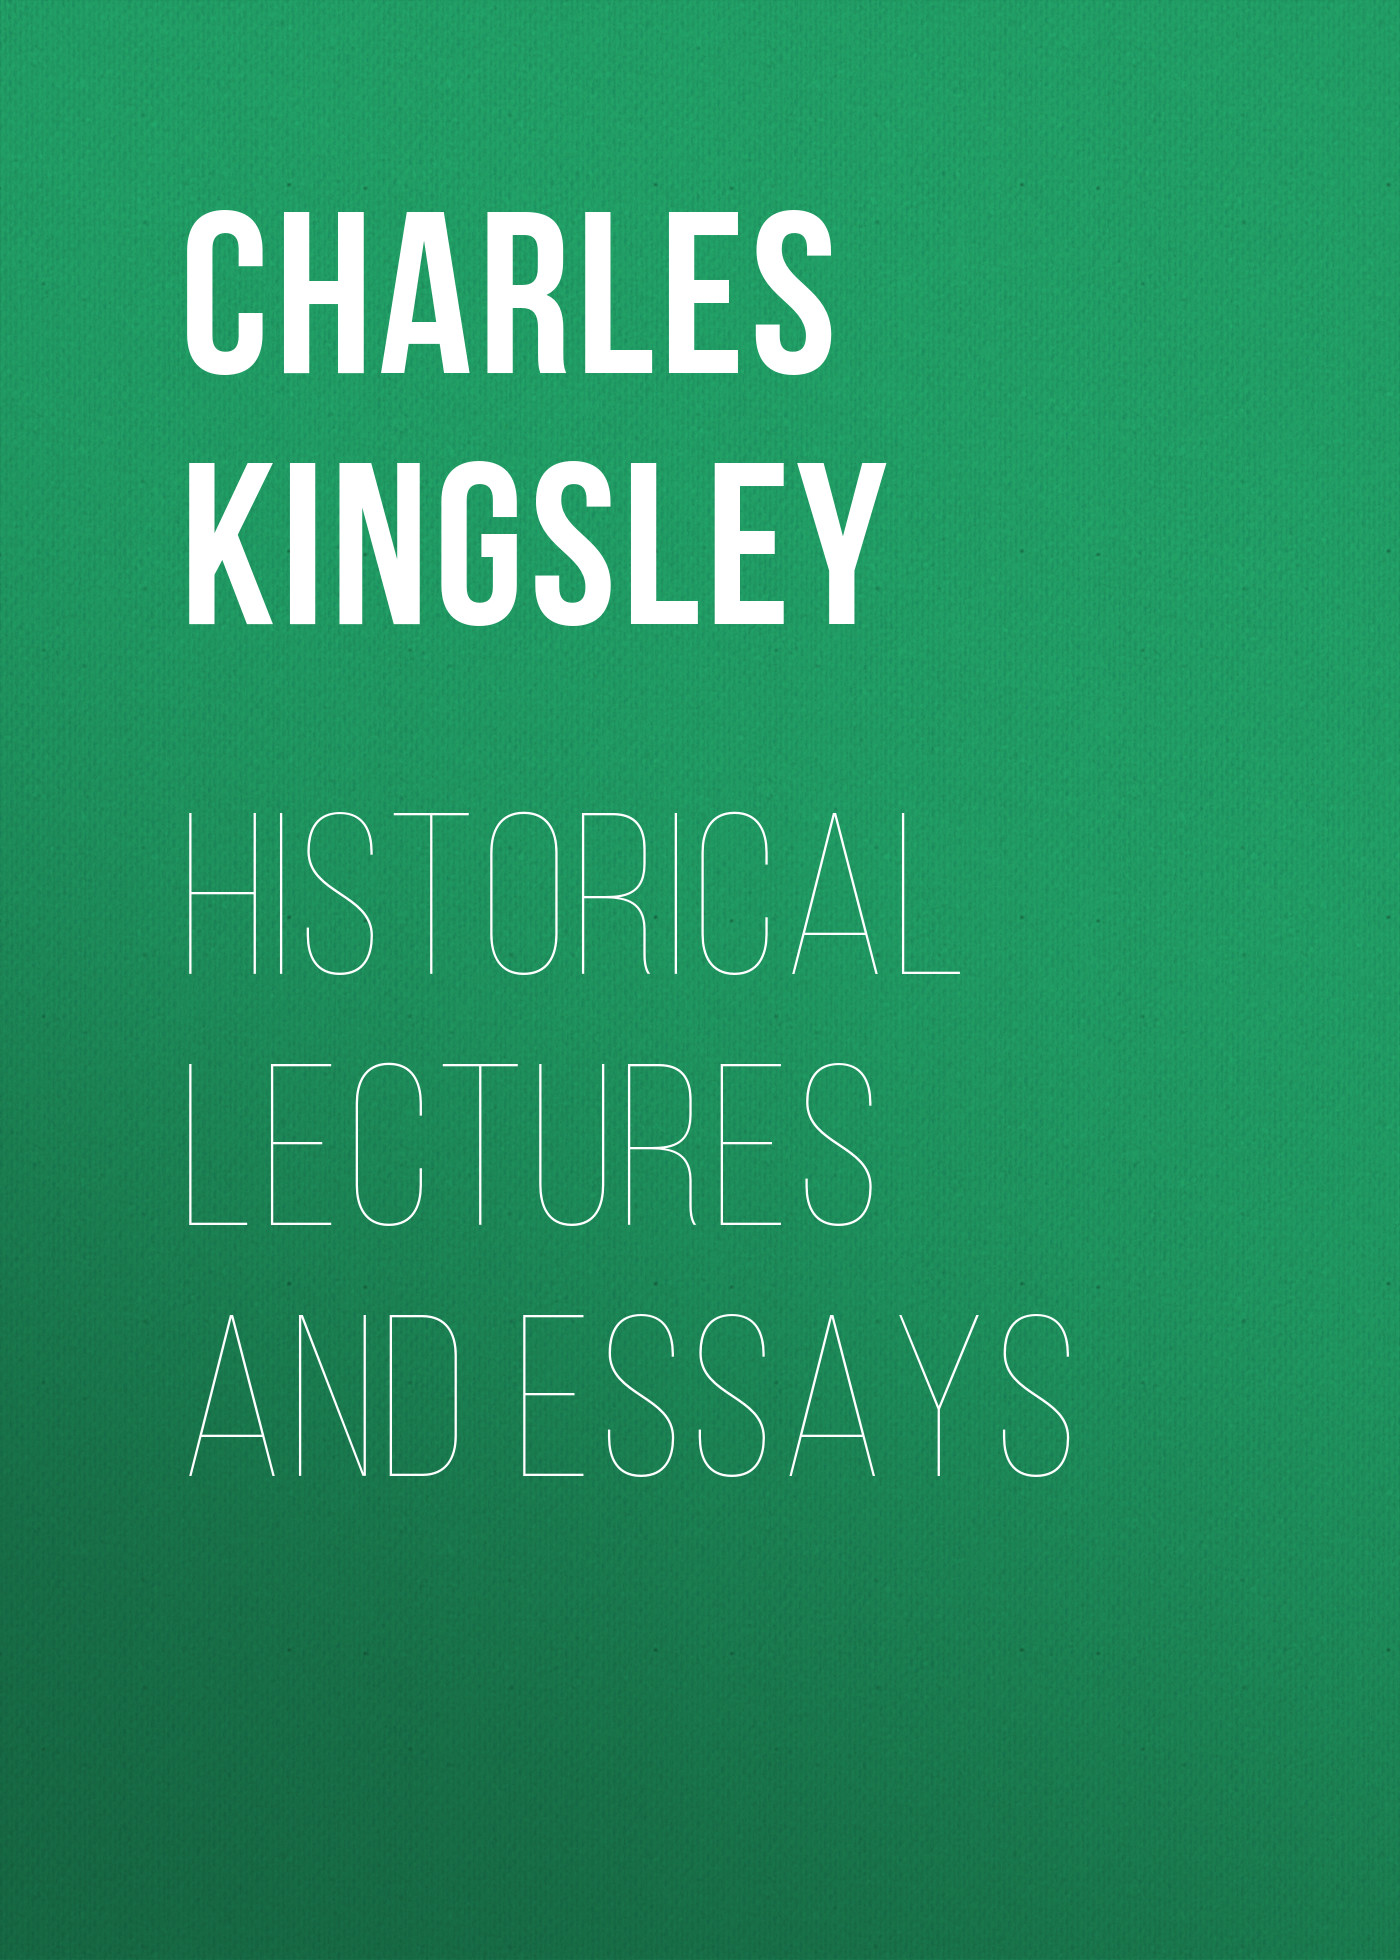 Charles Kingsley Historical Lectures and Essays